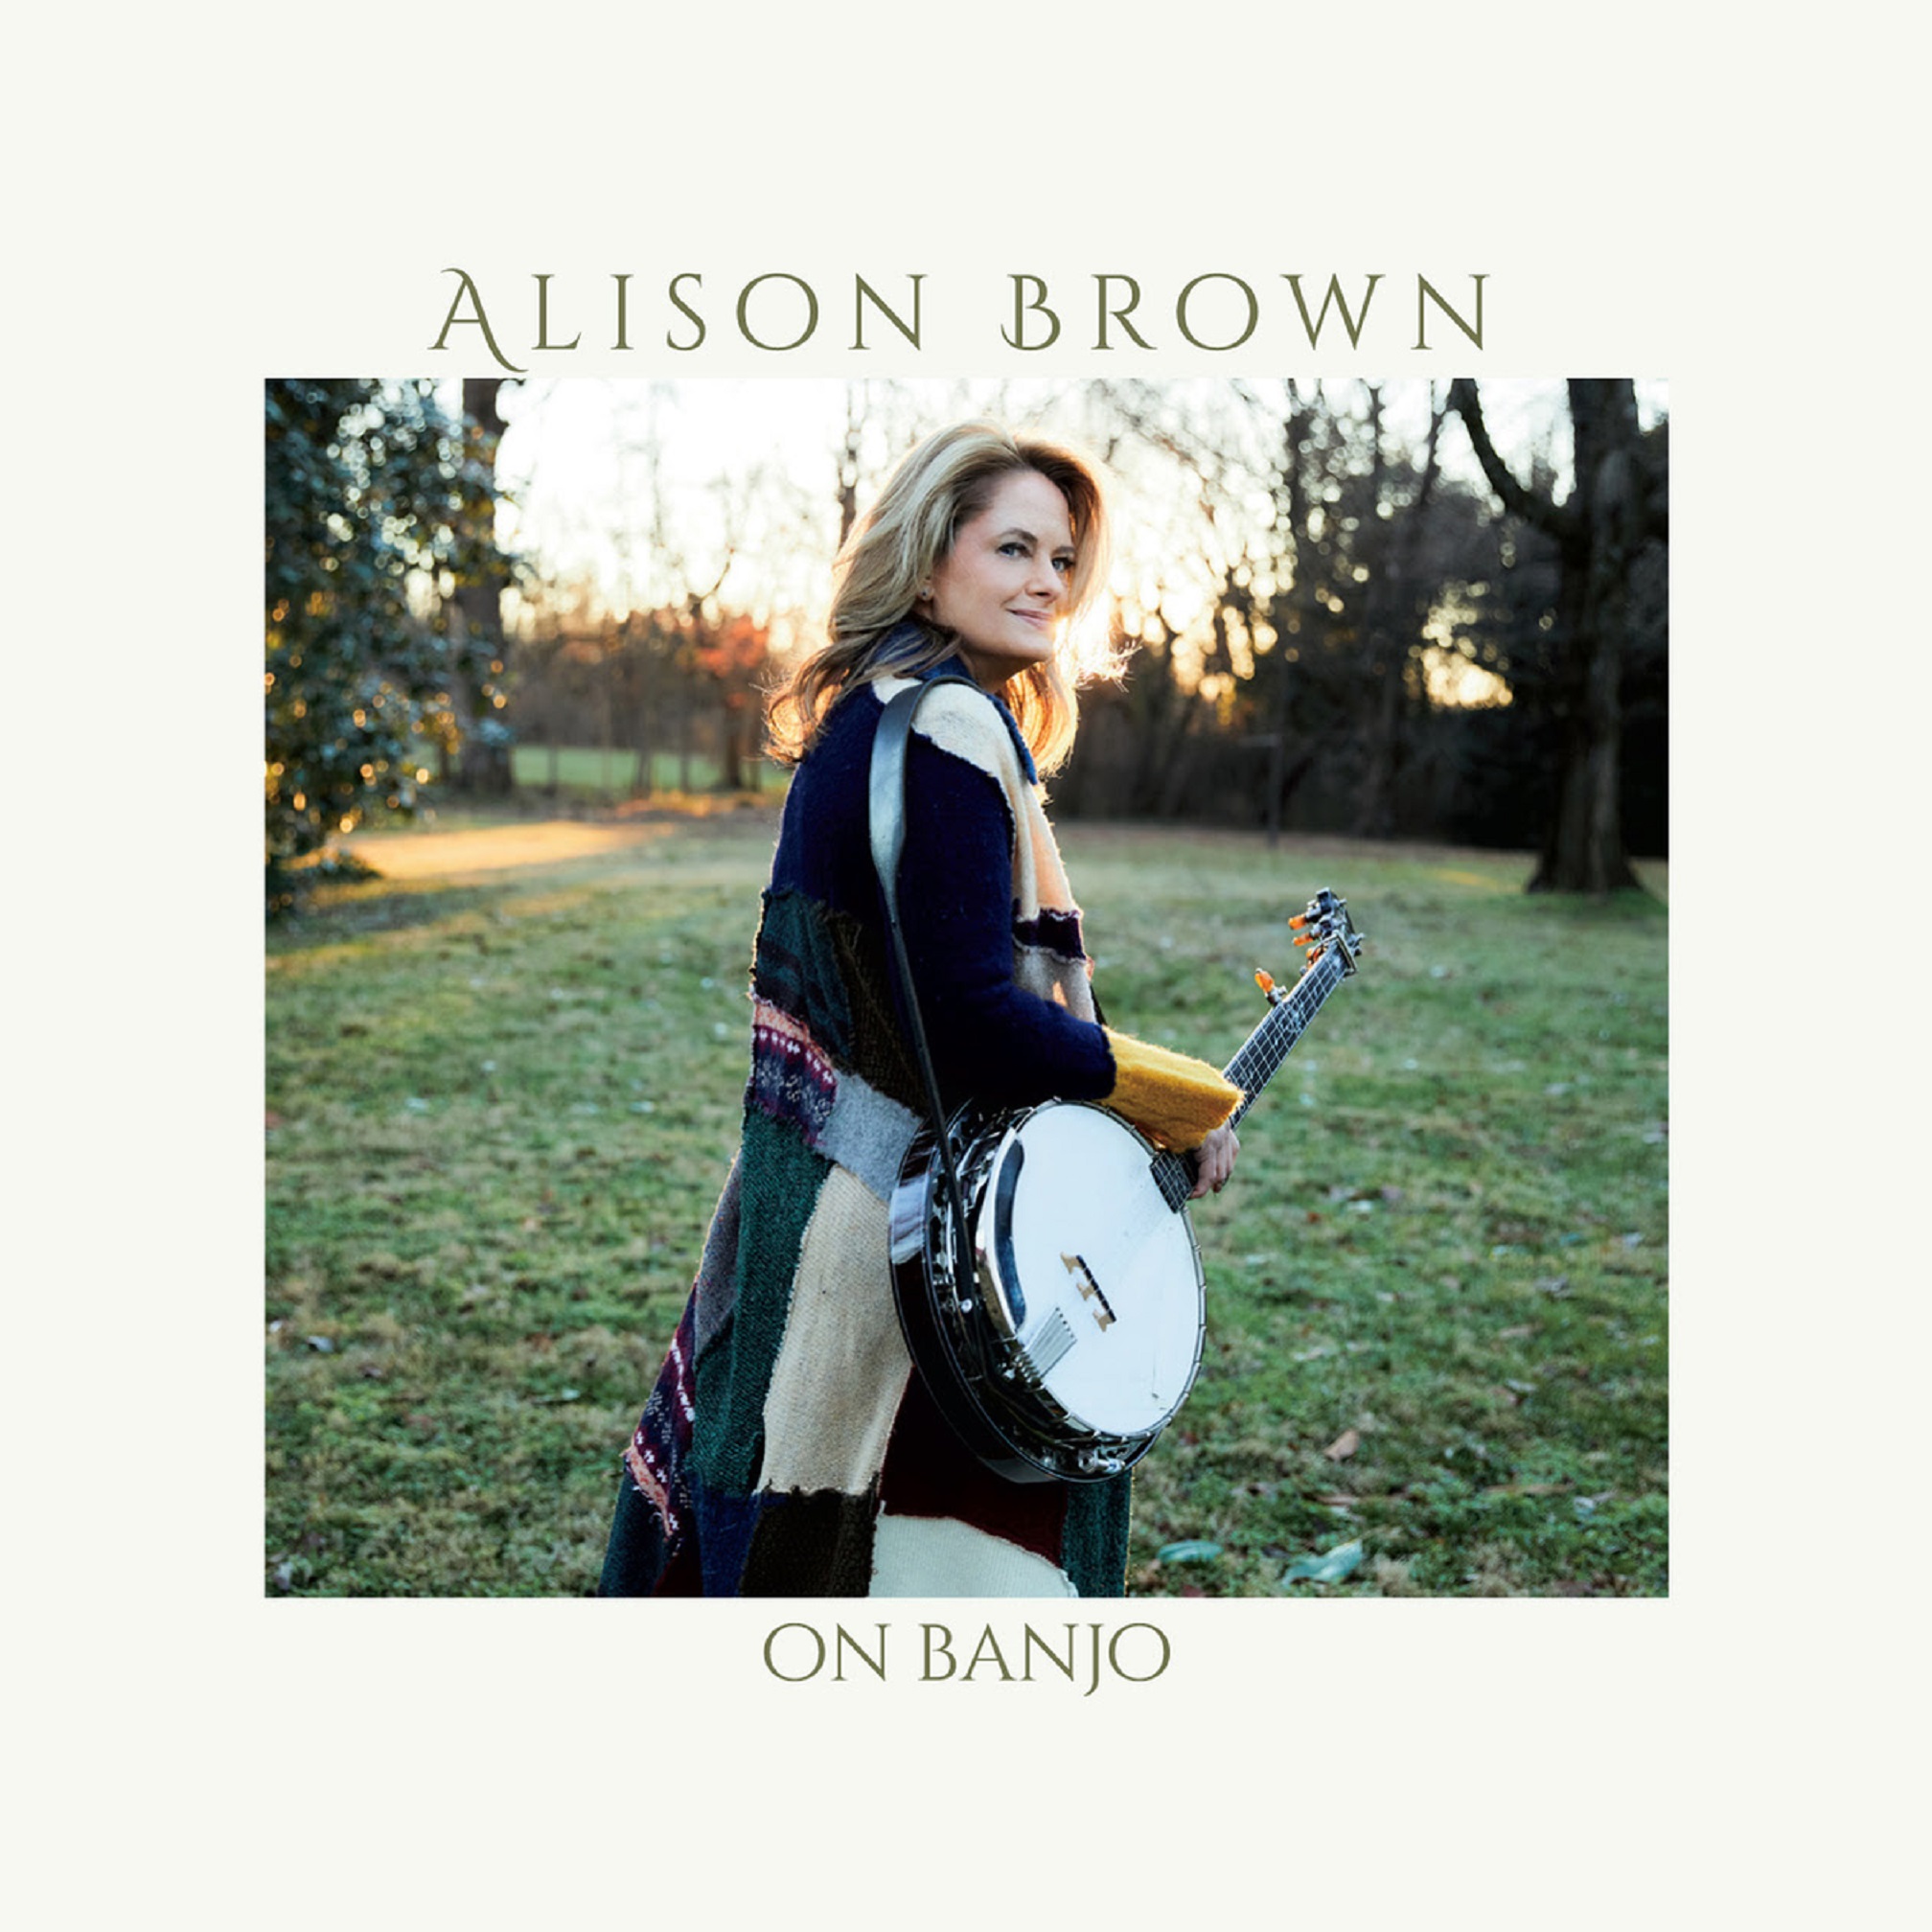 GRAMMY-WINNER ALISON BROWN UNCOVERS THE BANJO’S ECLECTIC, MULTI-GENRE VOICE WITH ON BANJO ALBUM OUT NOW